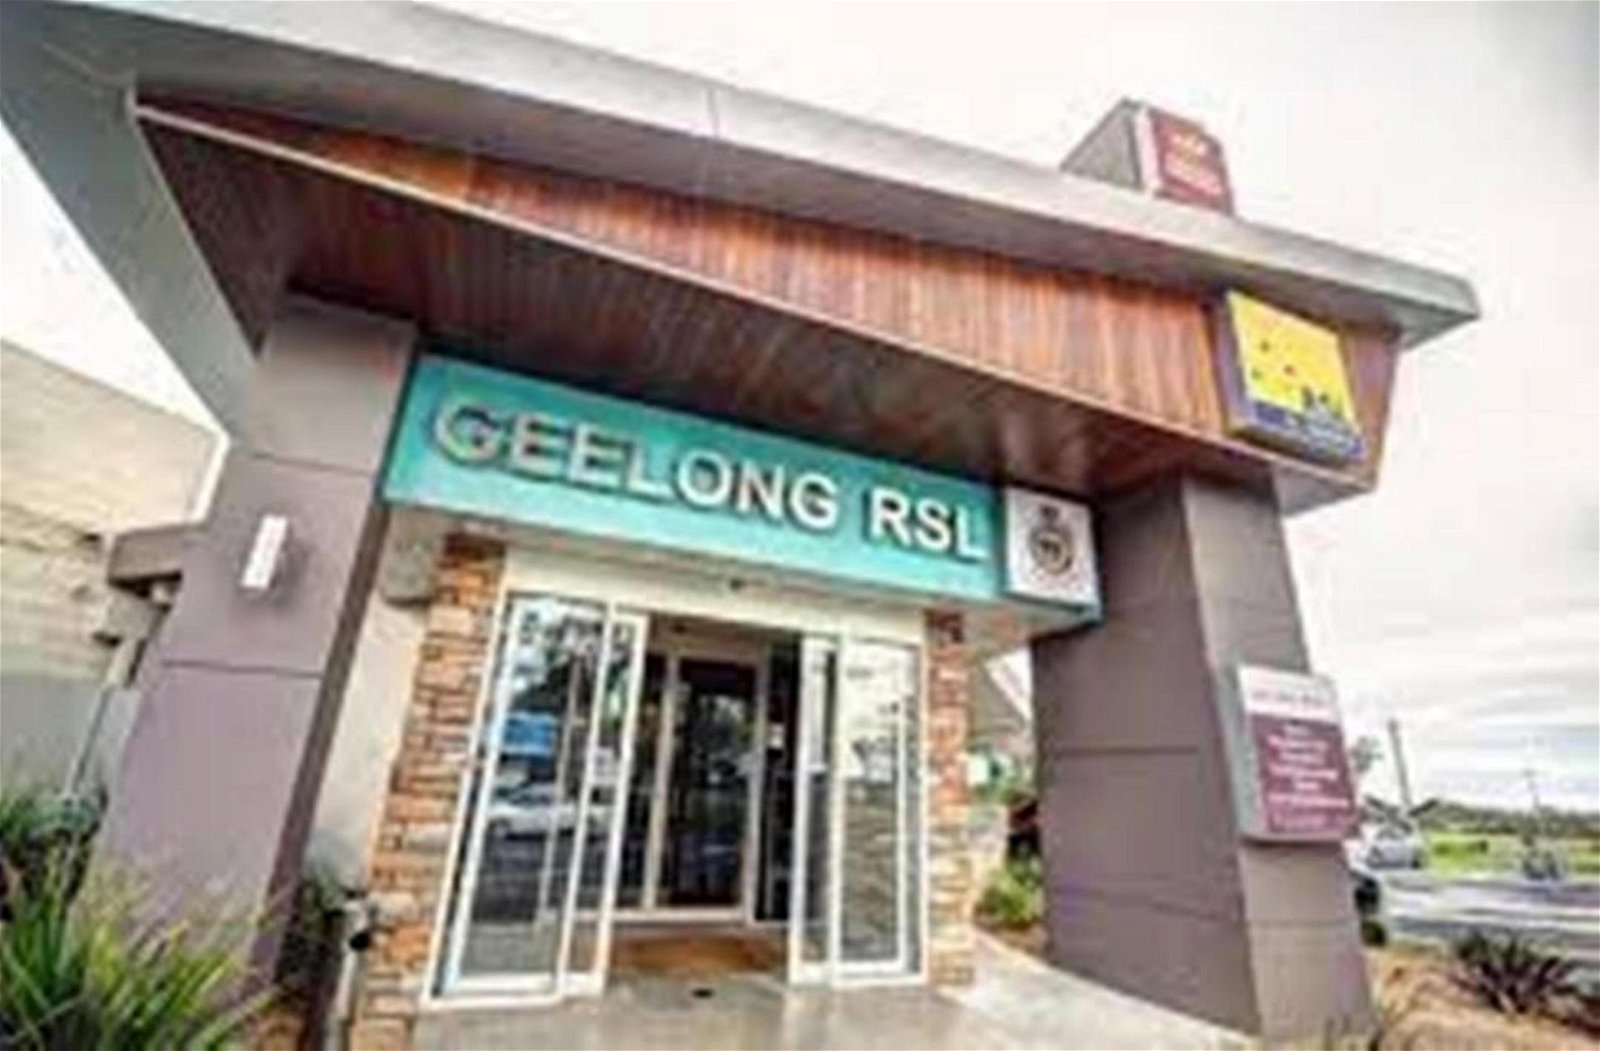 Geelong RSL Sub Branch Inc. - Food Delivery Shop